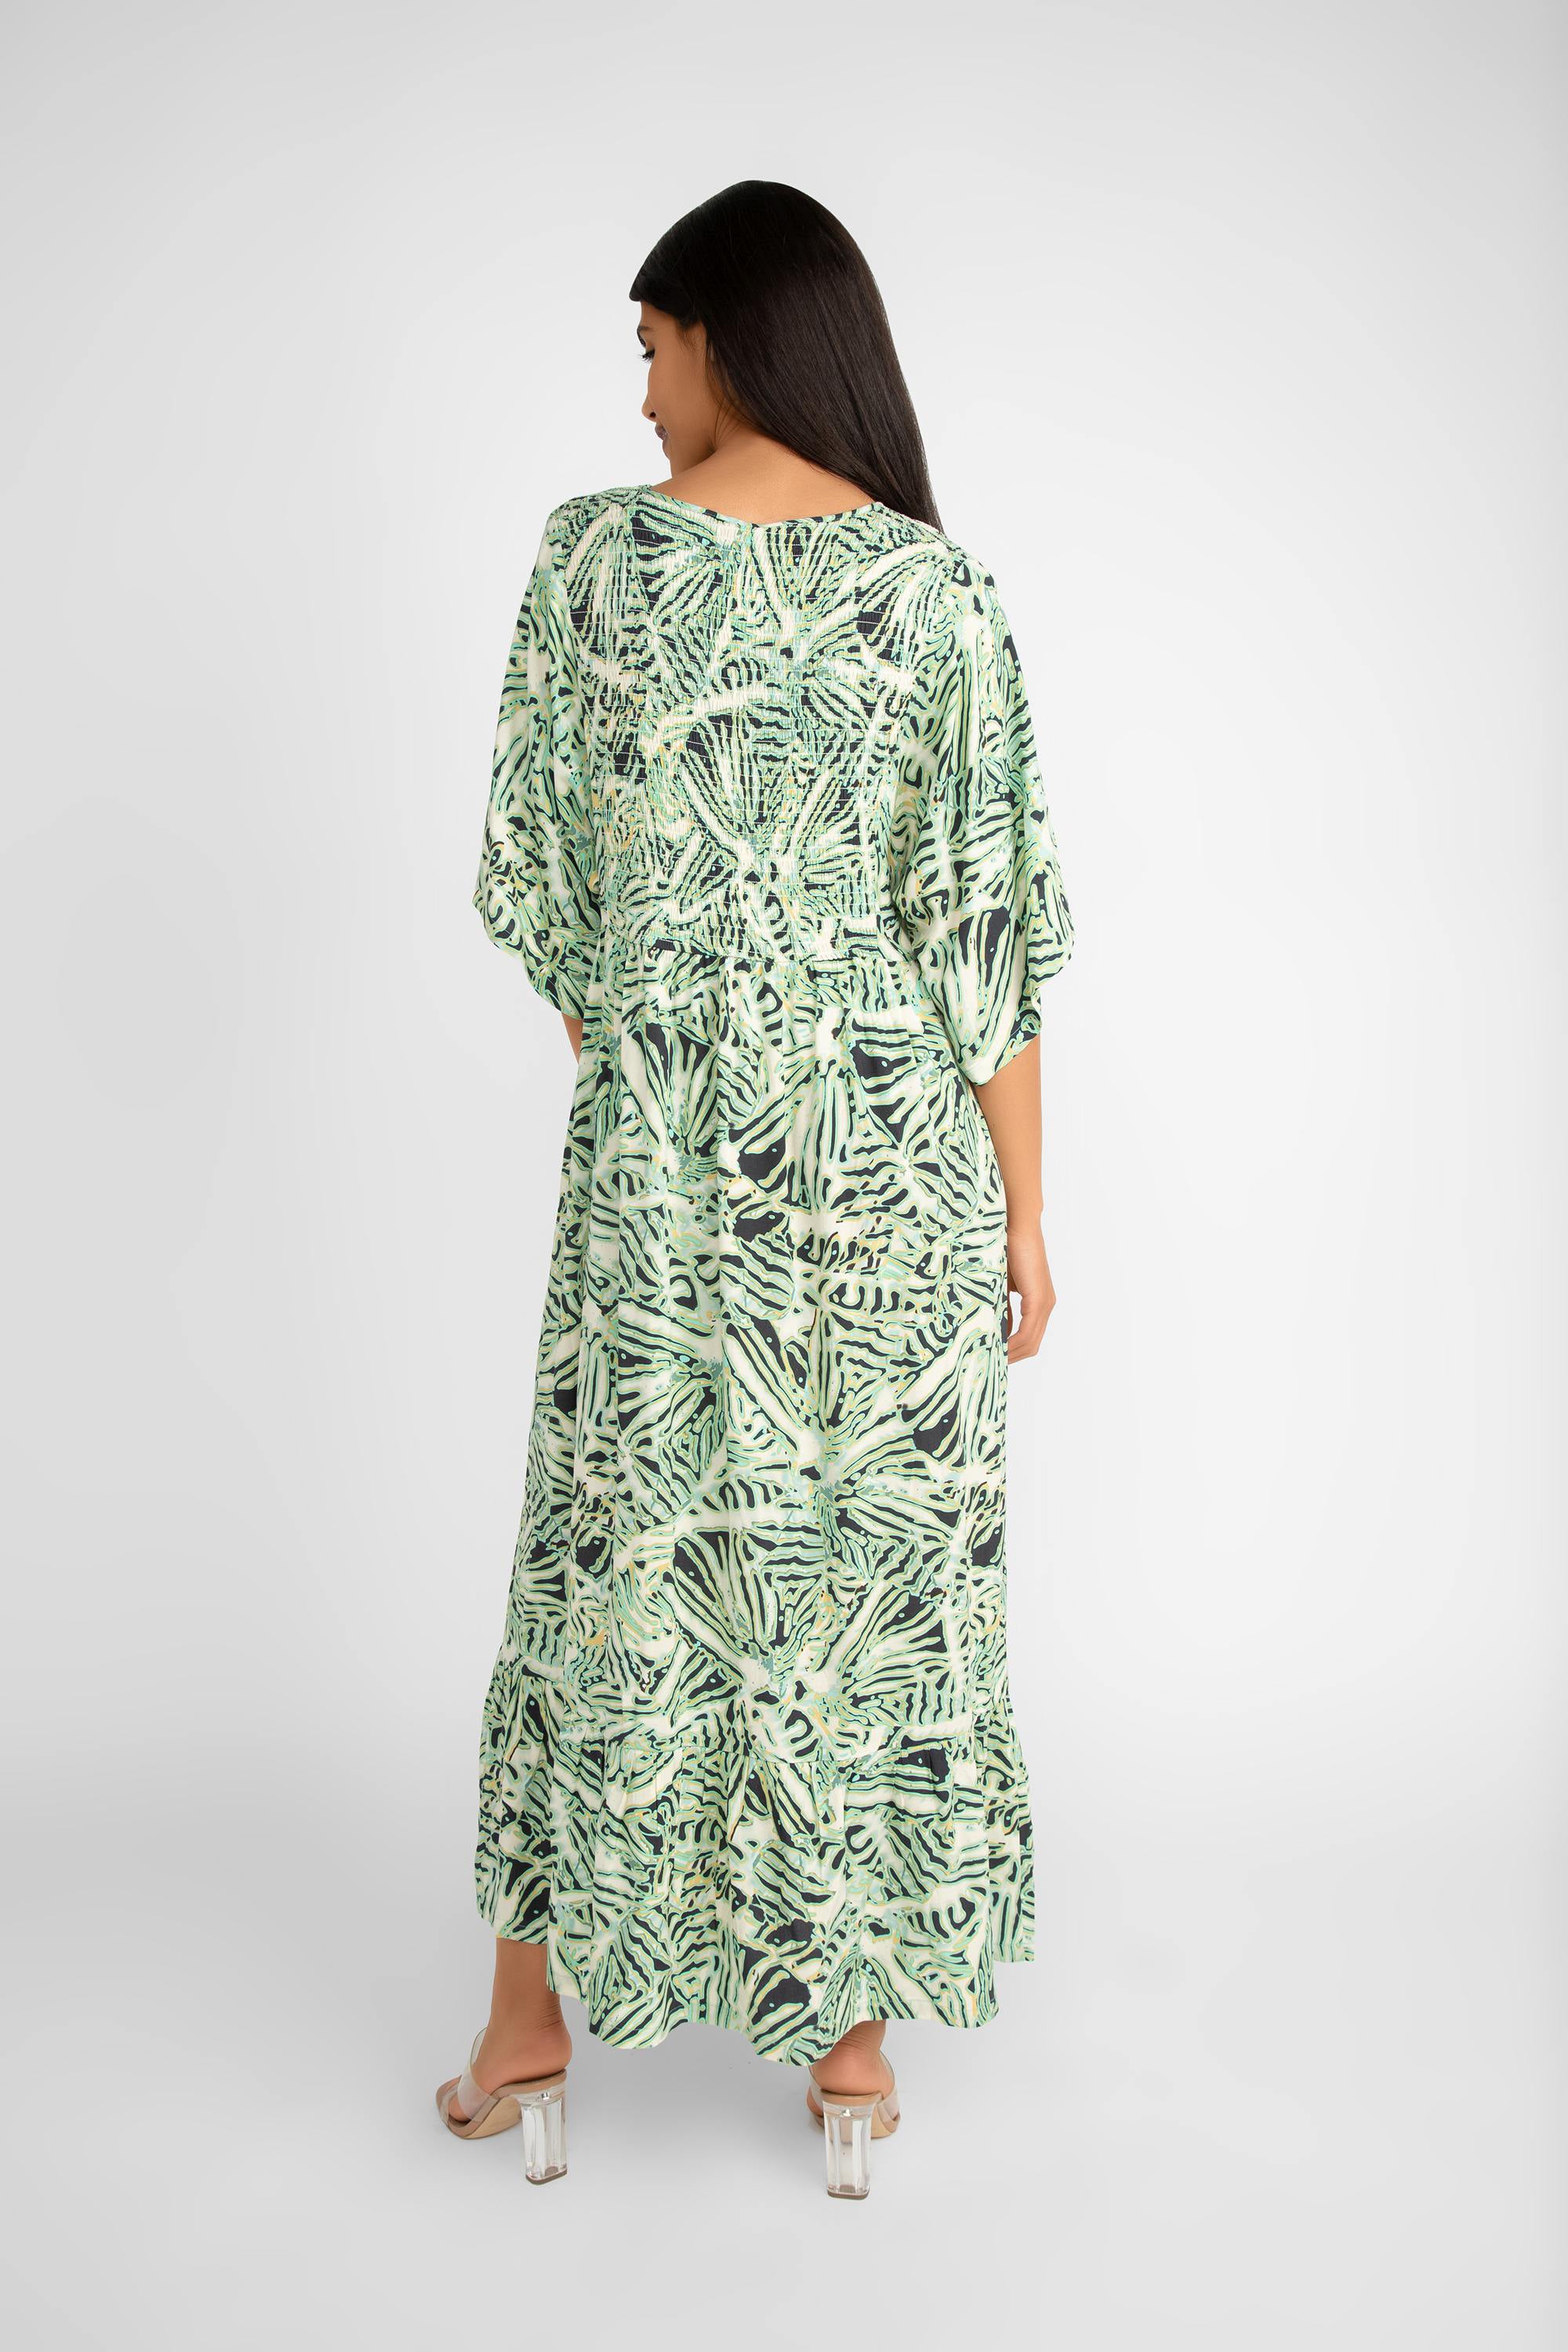 Back view of Soya Concept (40629) Women's Short Sleeve Aqua Foliage Printed Maxi Dress with V-neck and smocked bodice